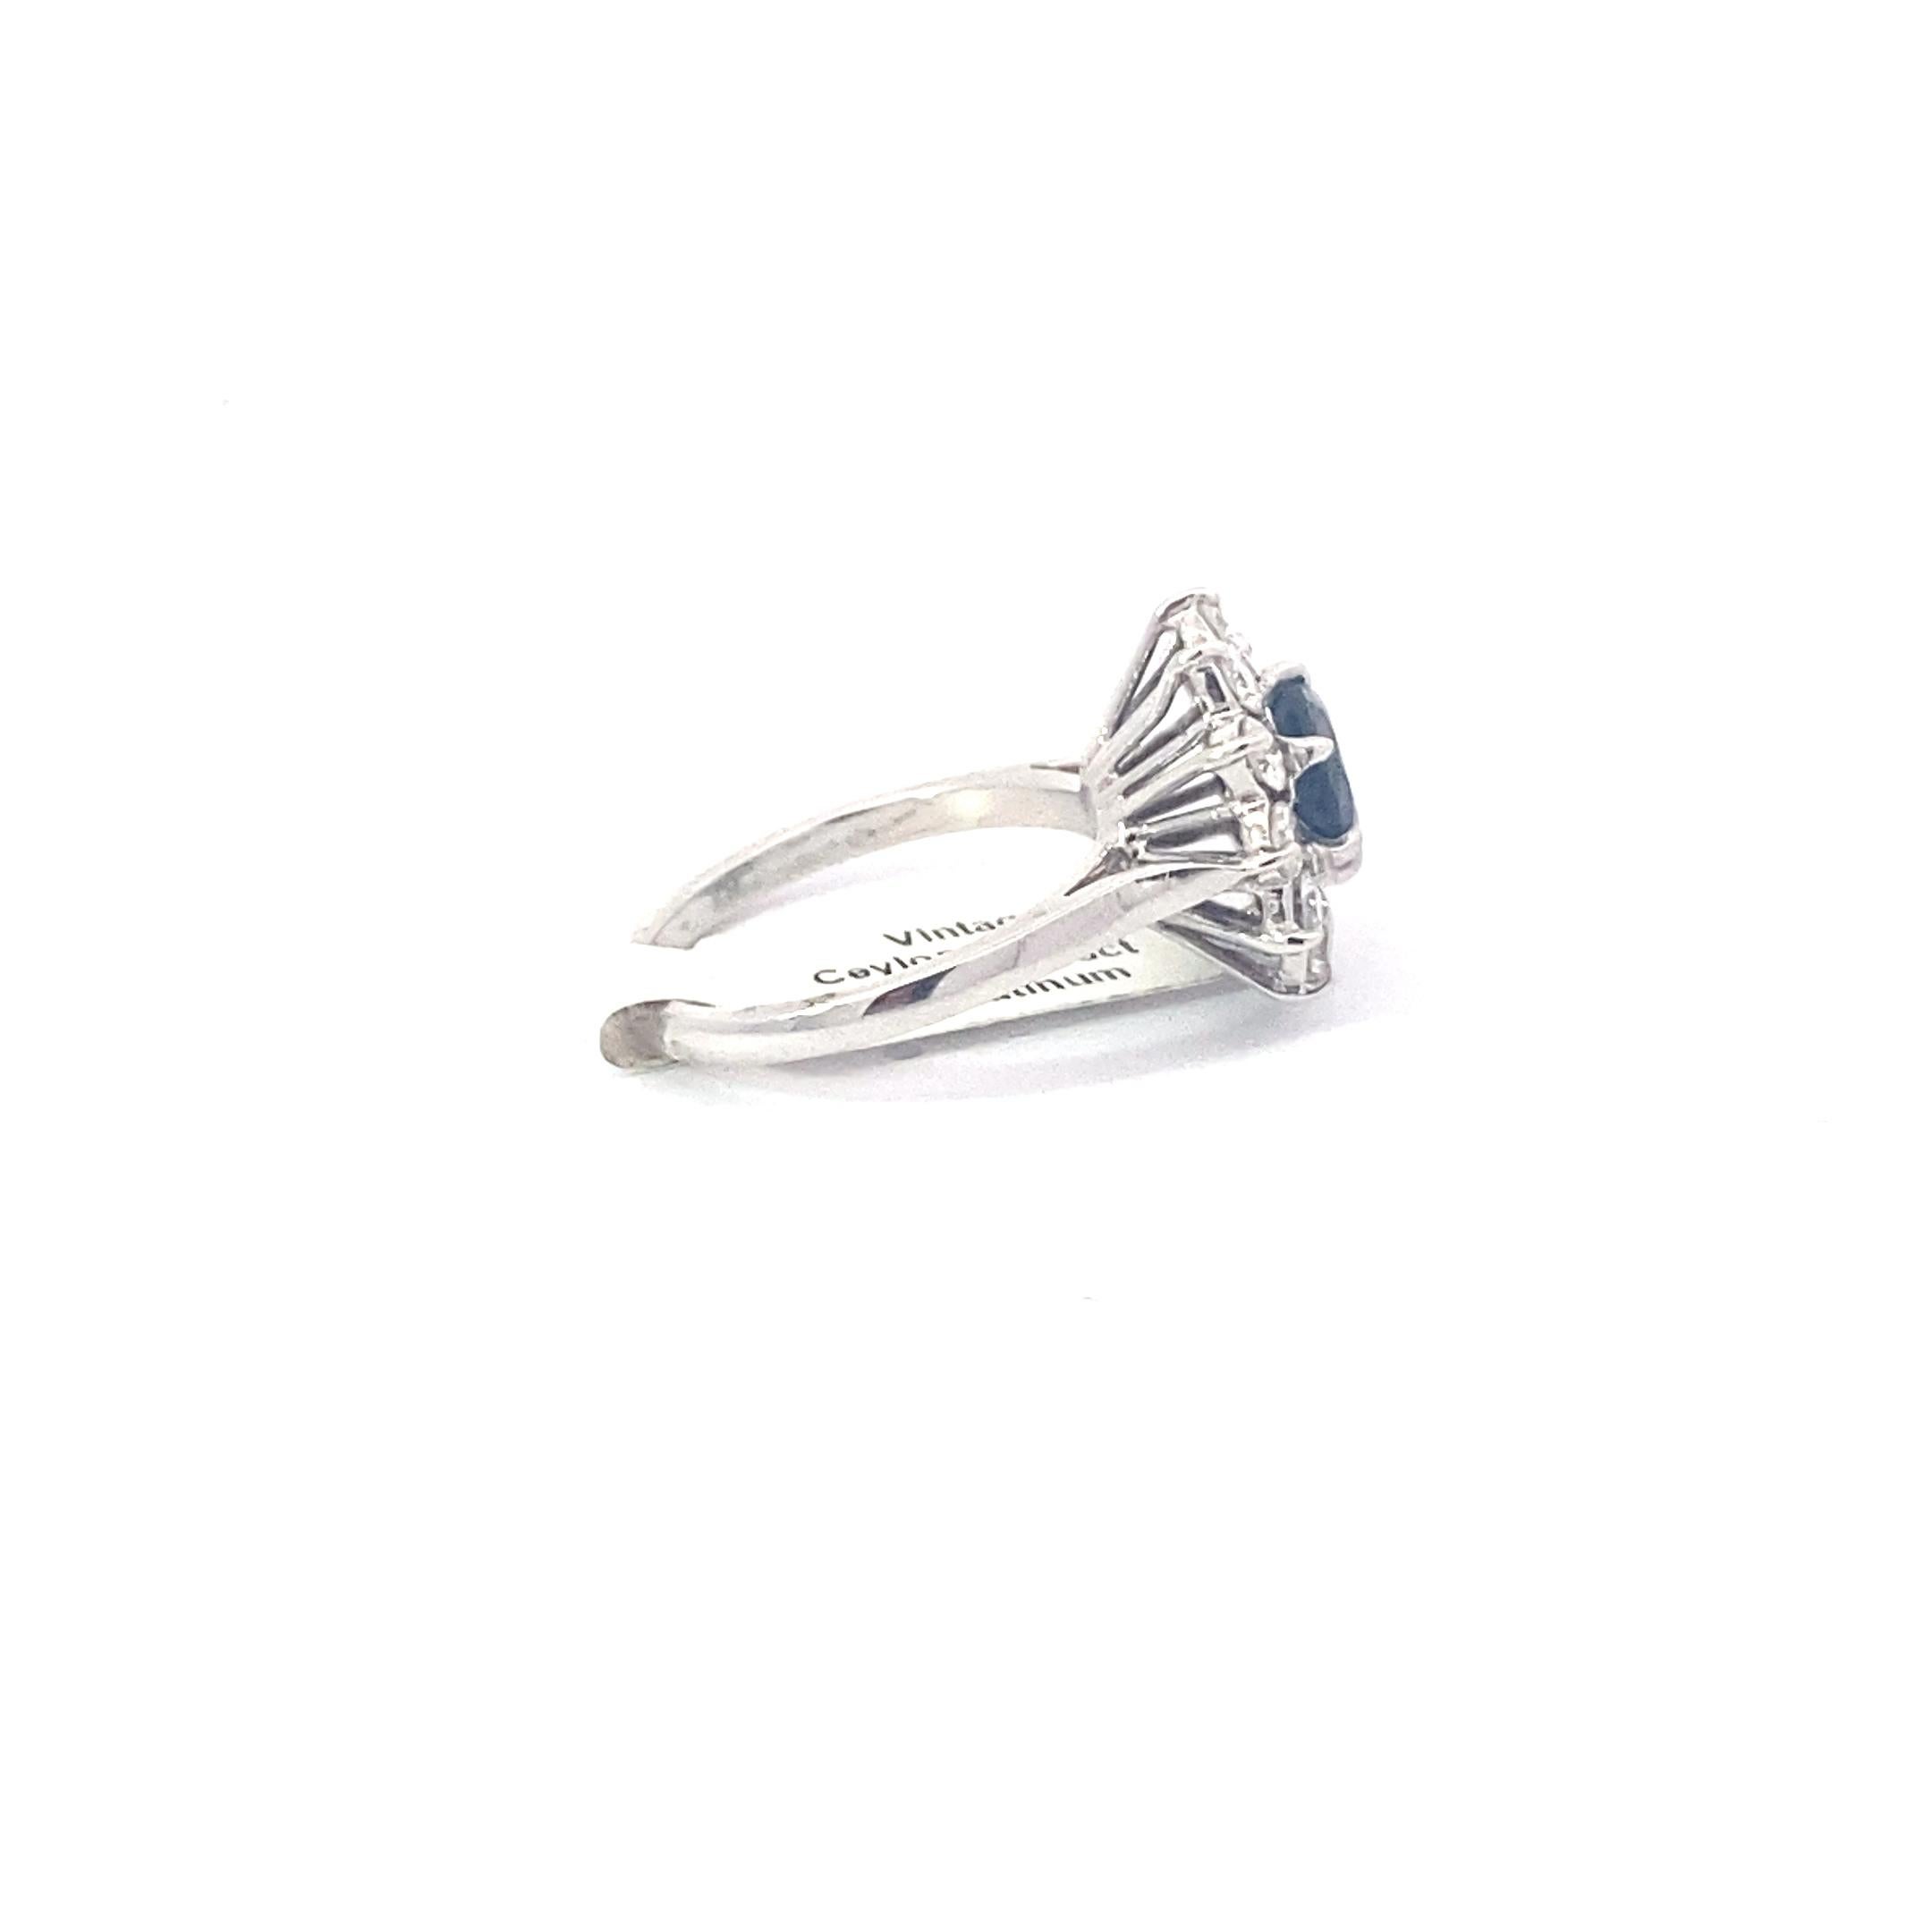 2.23ct Heat Treated Ceylon Sapphire Platinum Ring In Good Condition For Sale In Brooklyn, NY